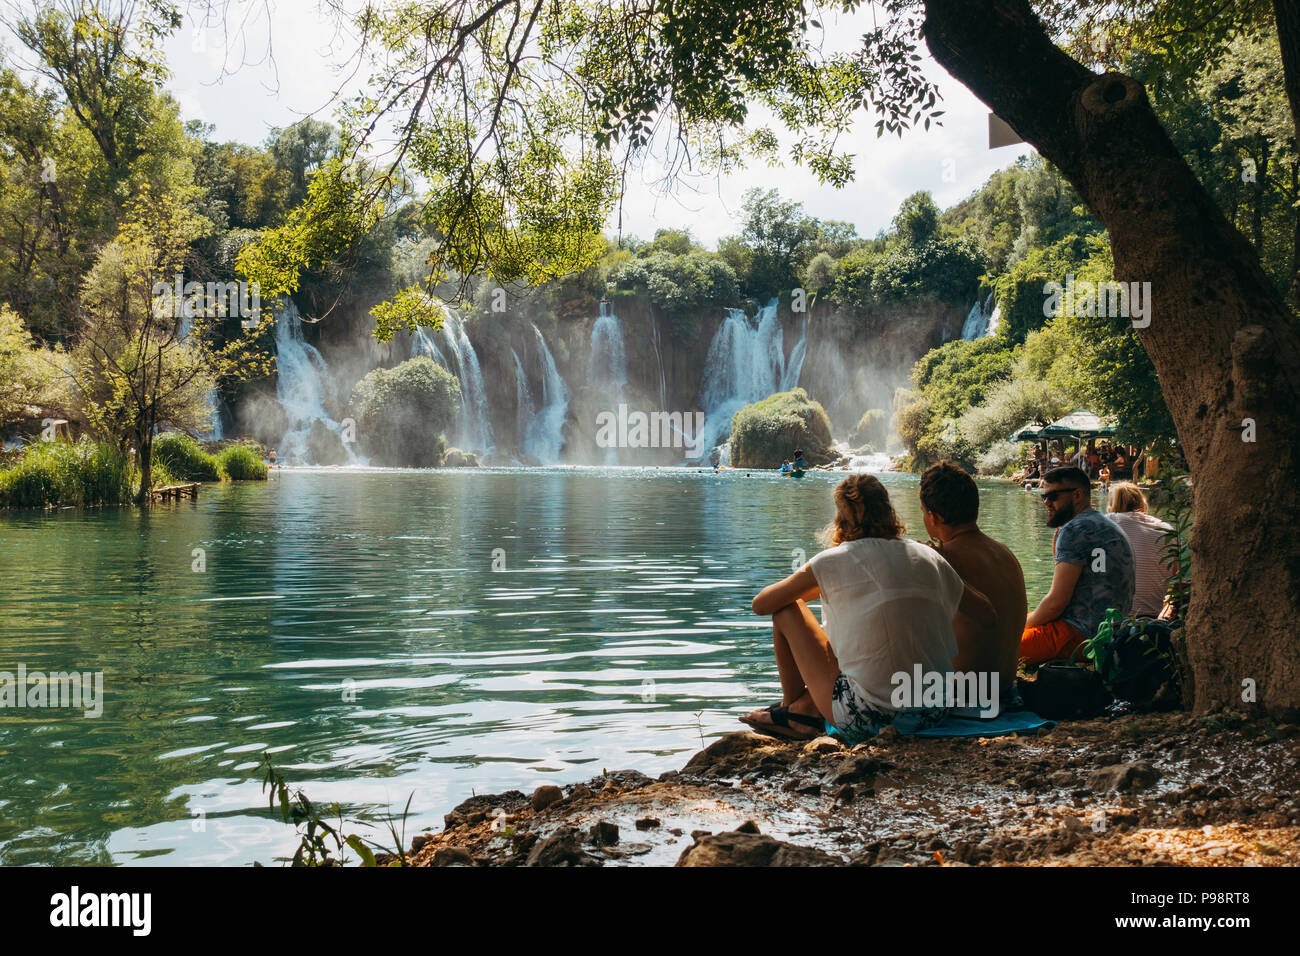 Kravica waterfall - a tufa cascade in Bosnia and Herzegovina, attracts many tourists for a refreshing dip to escape the summer heat Stock Photo